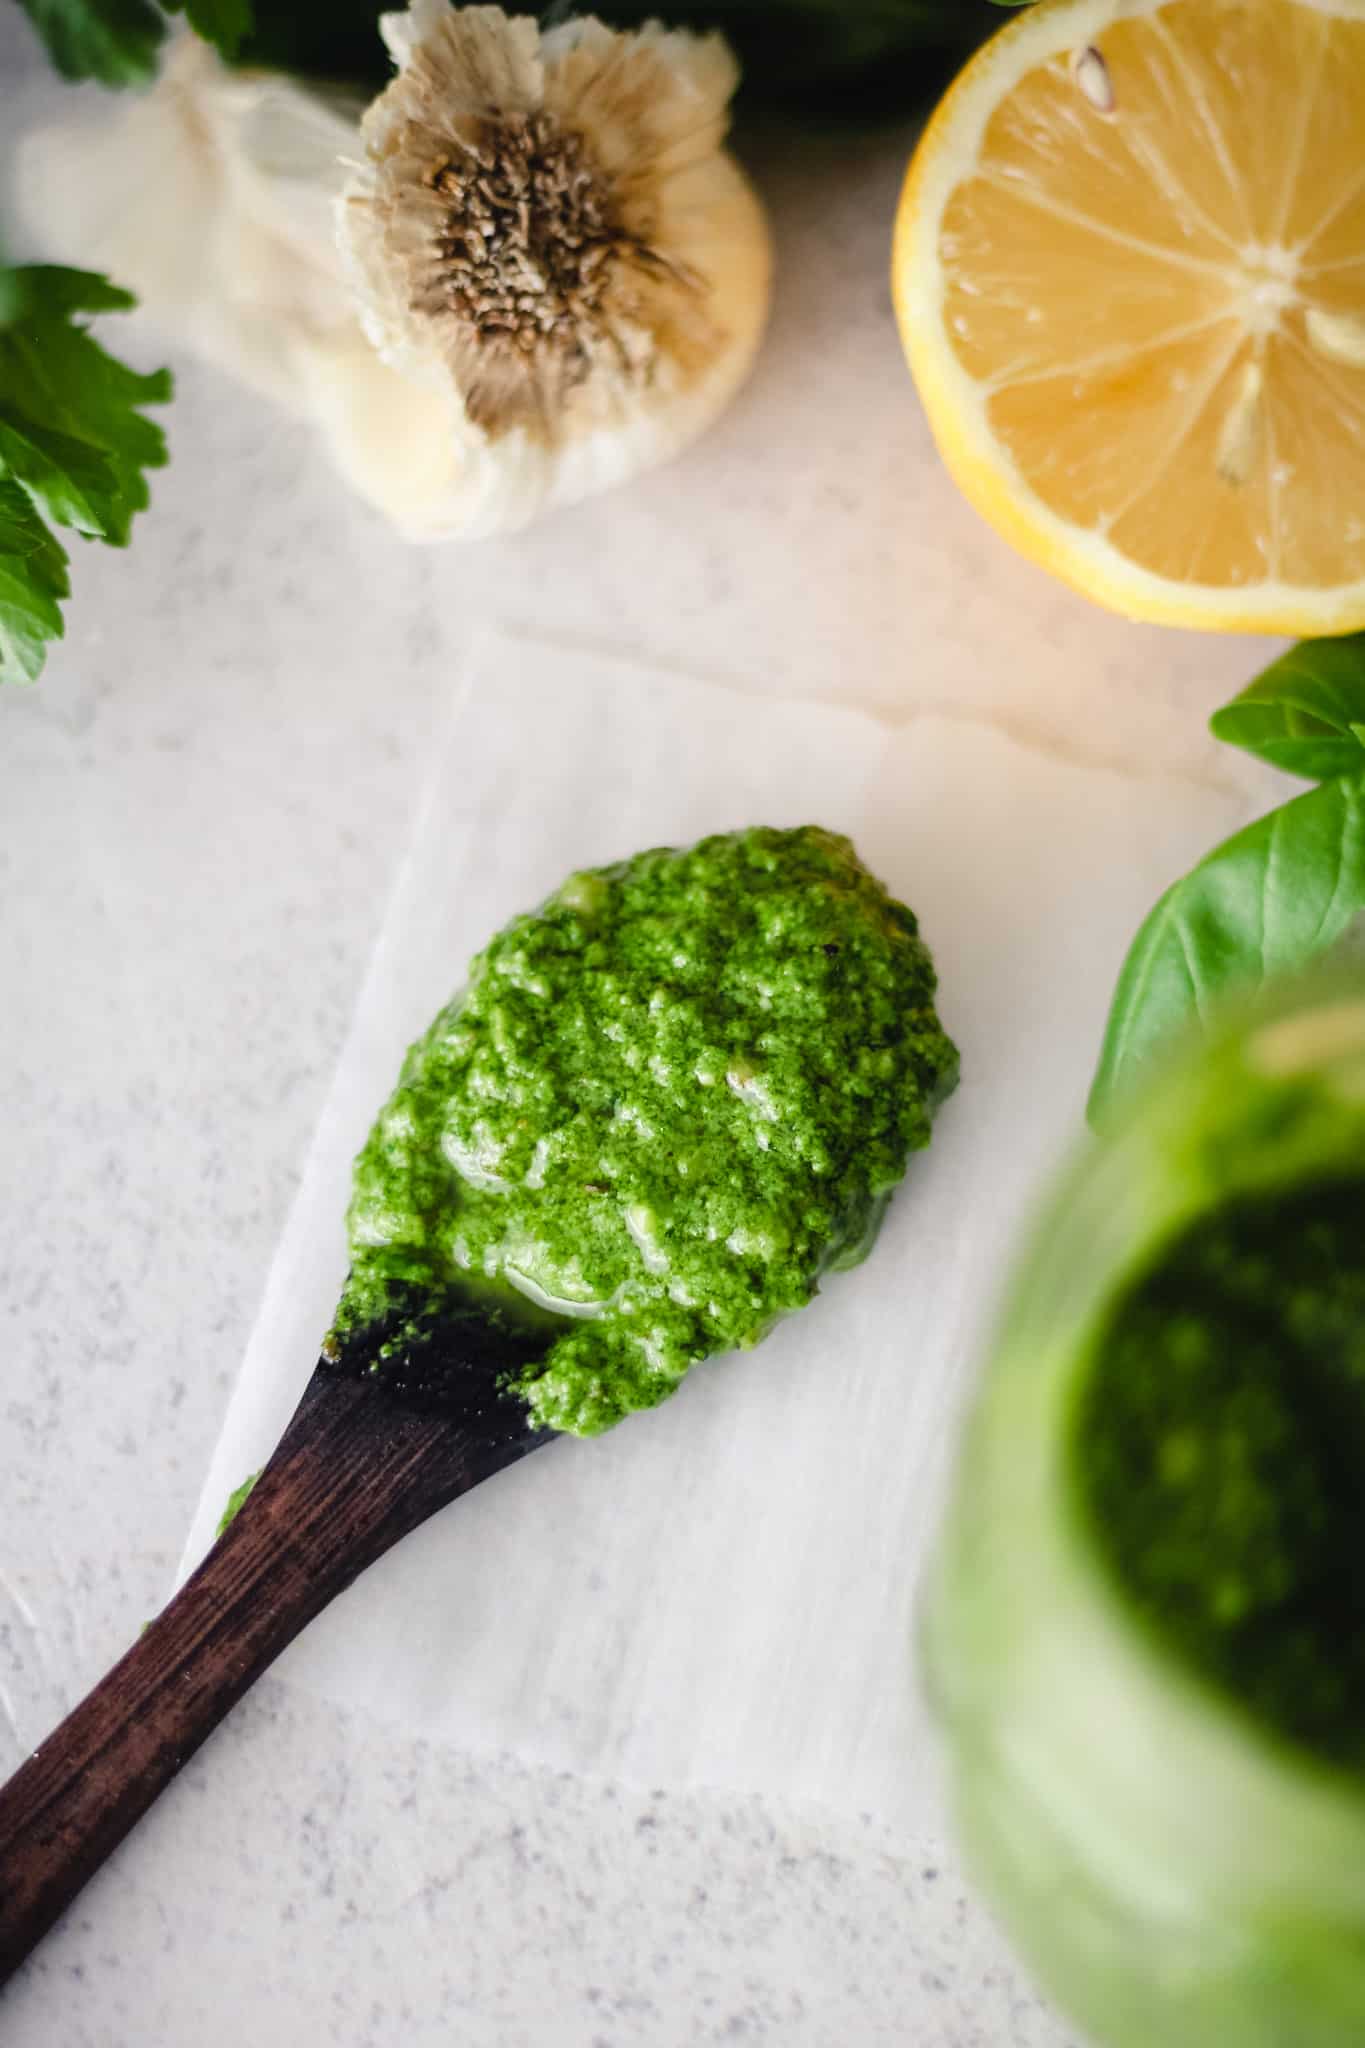 Pesto in a wooden spoon with lemon, garlic and basil.